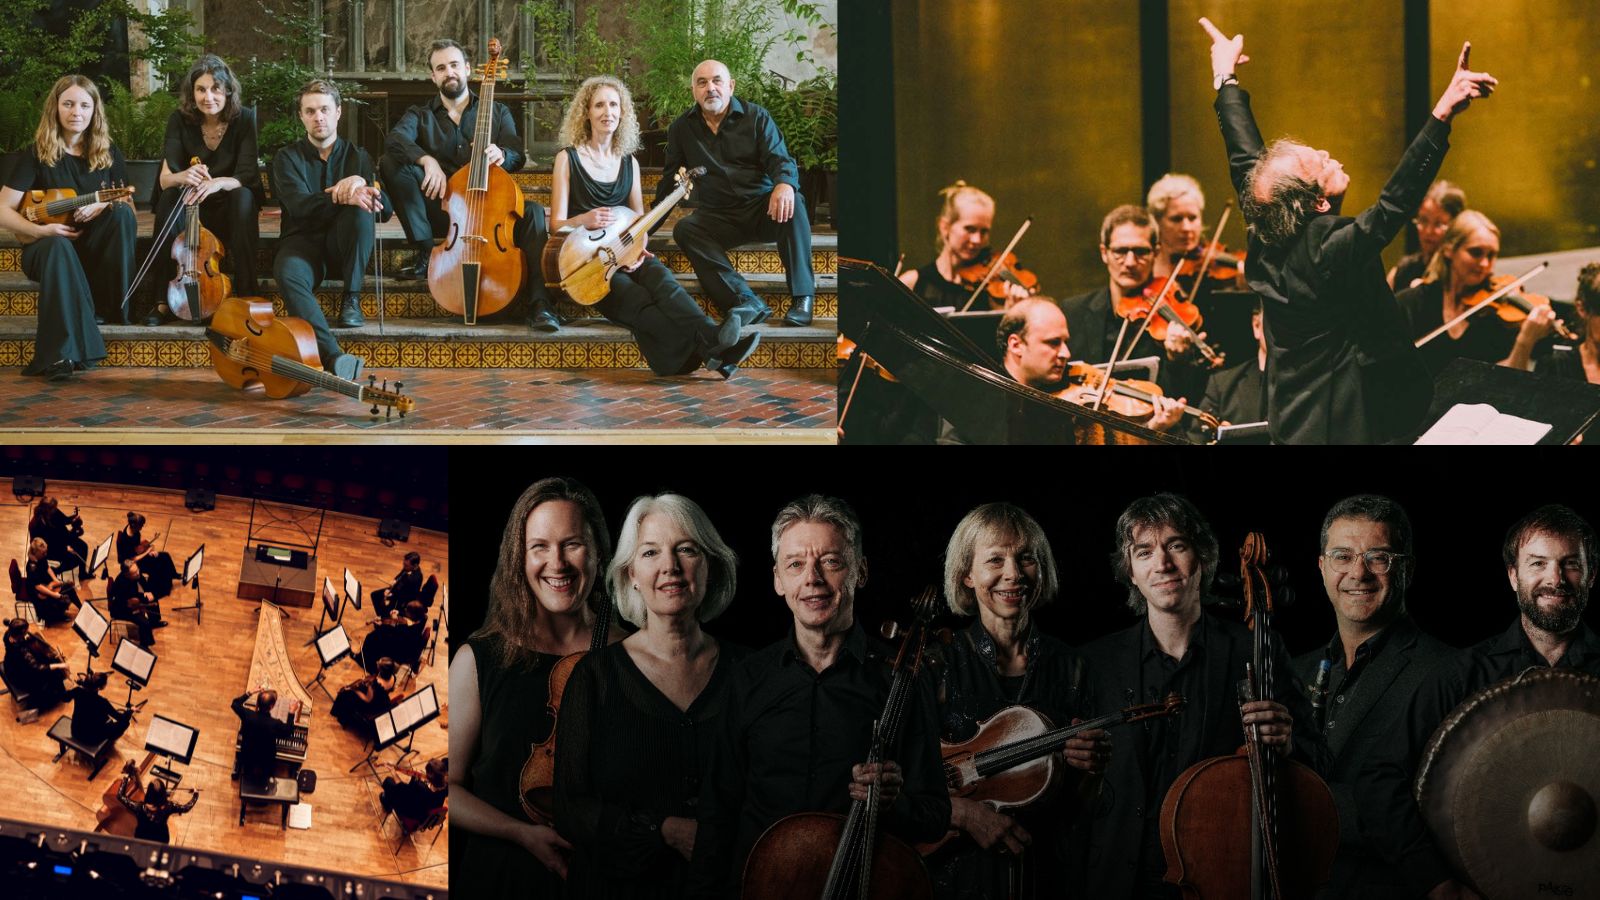 A composite image showing various musicians in professional group shots or during performances: on the top row a group of six musicians dressed in black seated on decorative mosaic steps with their instruments (violins, cellos), and a man (Lars Ulrik Mortensen) gestures passionately with his hands in the air while conducting an orchestra. On the bottom row: an aerial shot of an orchestra during a concert, and a group of seven musicians in a dark space holding their instruments (violins, violas, drums)